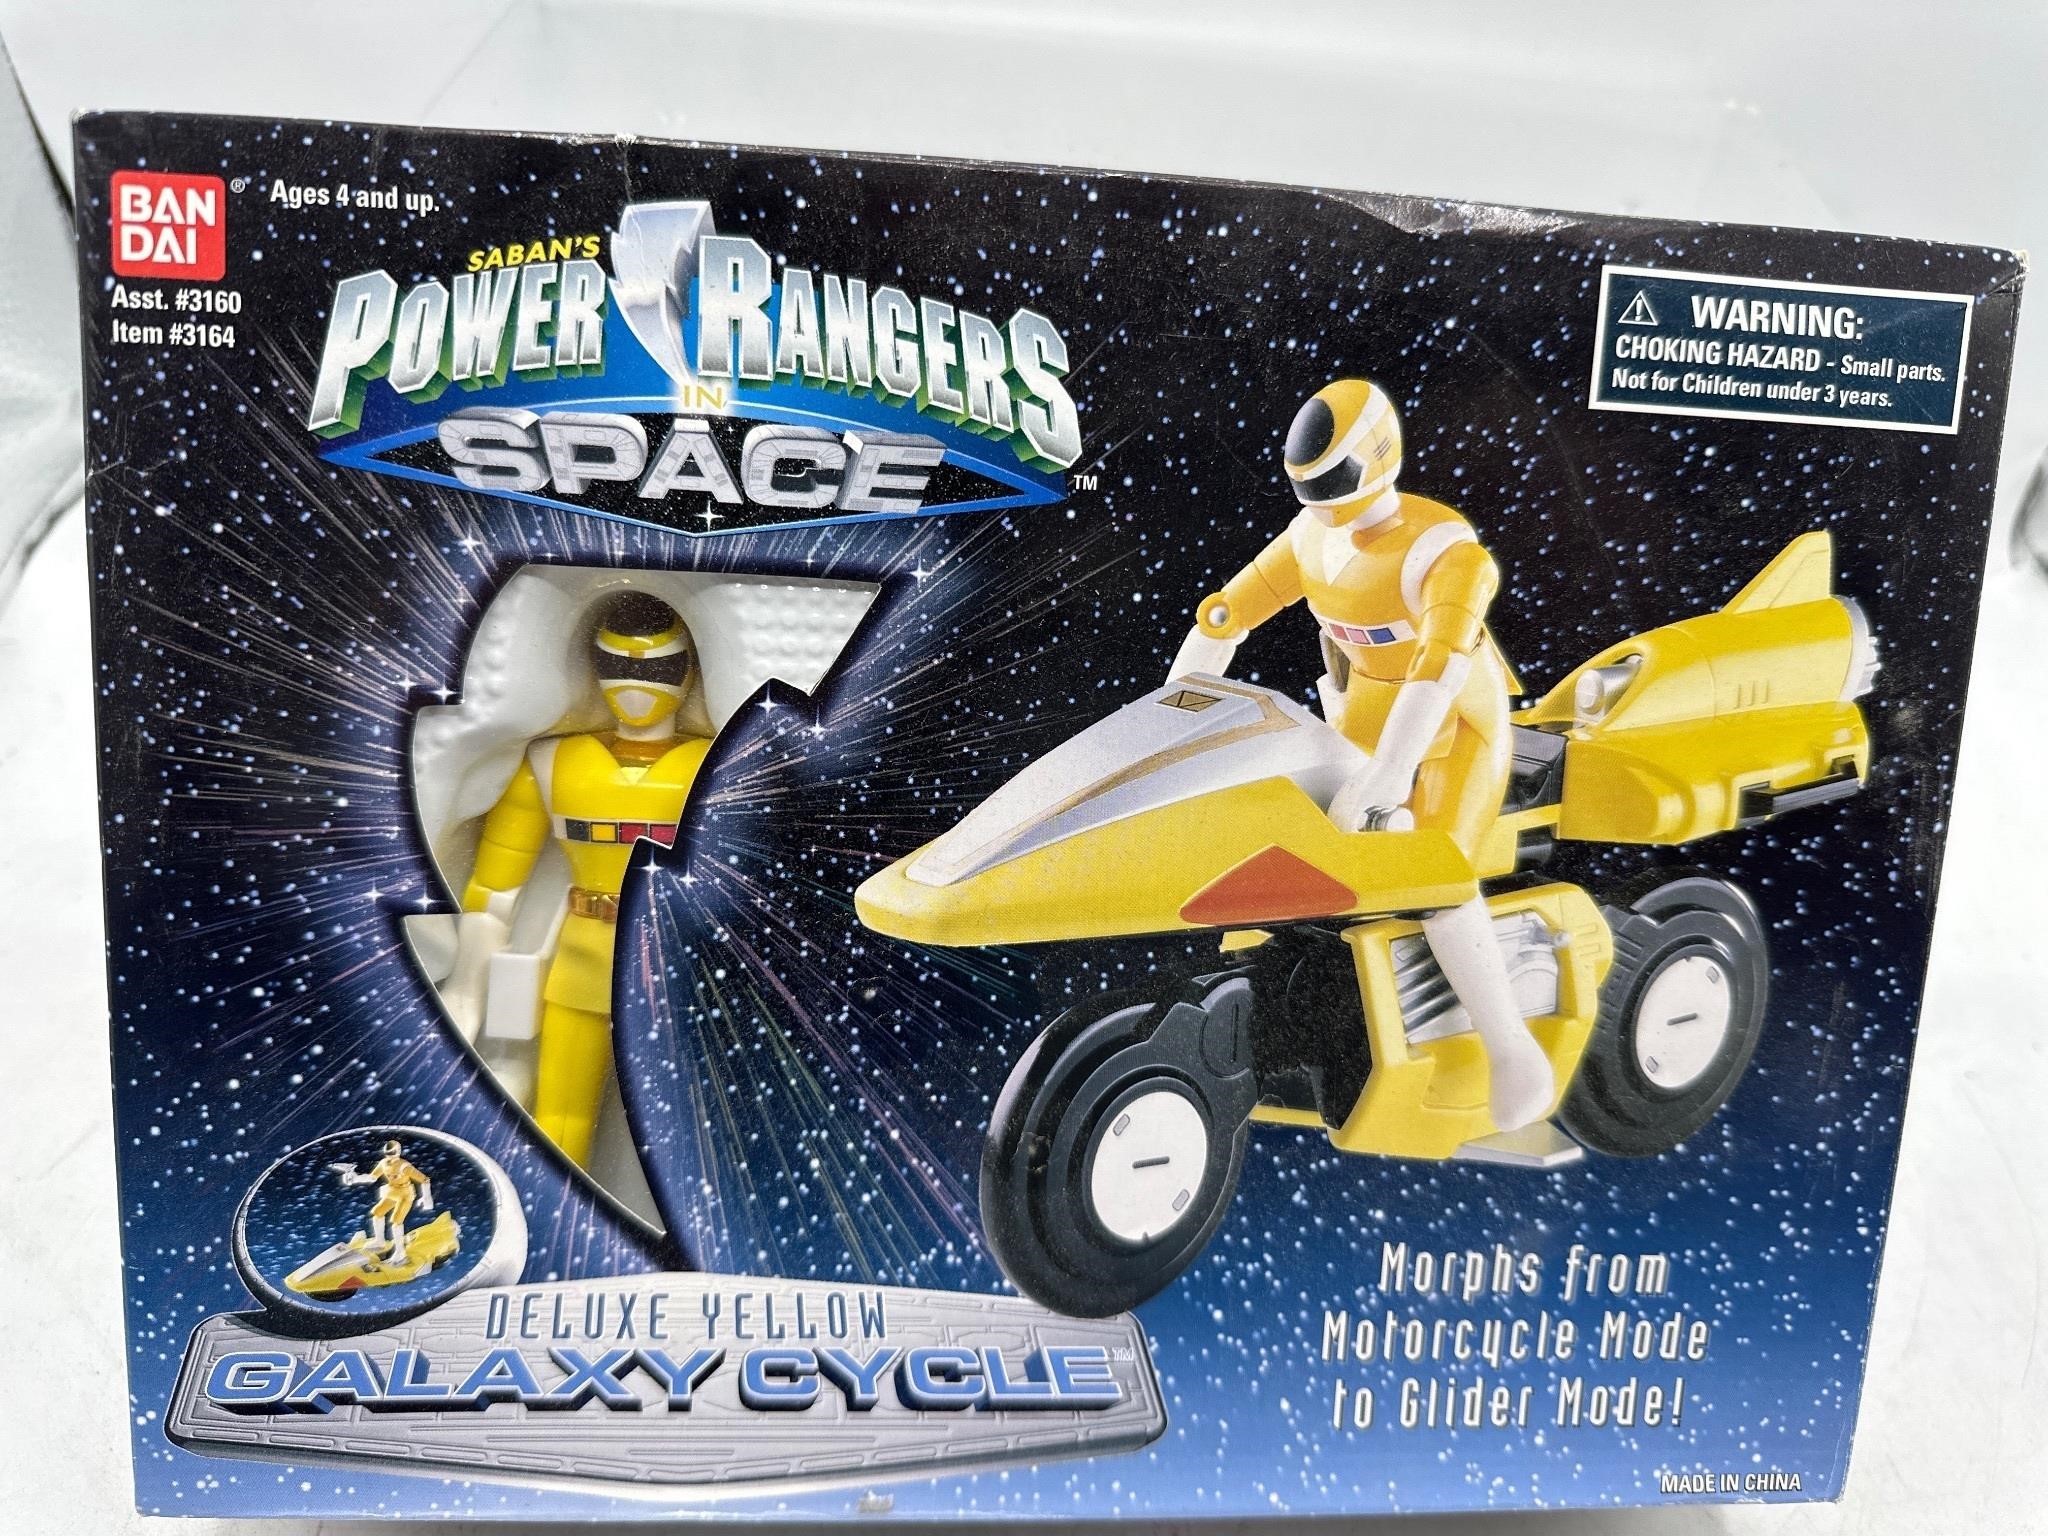 Power rangers space deluxe yellow galaxy cycle